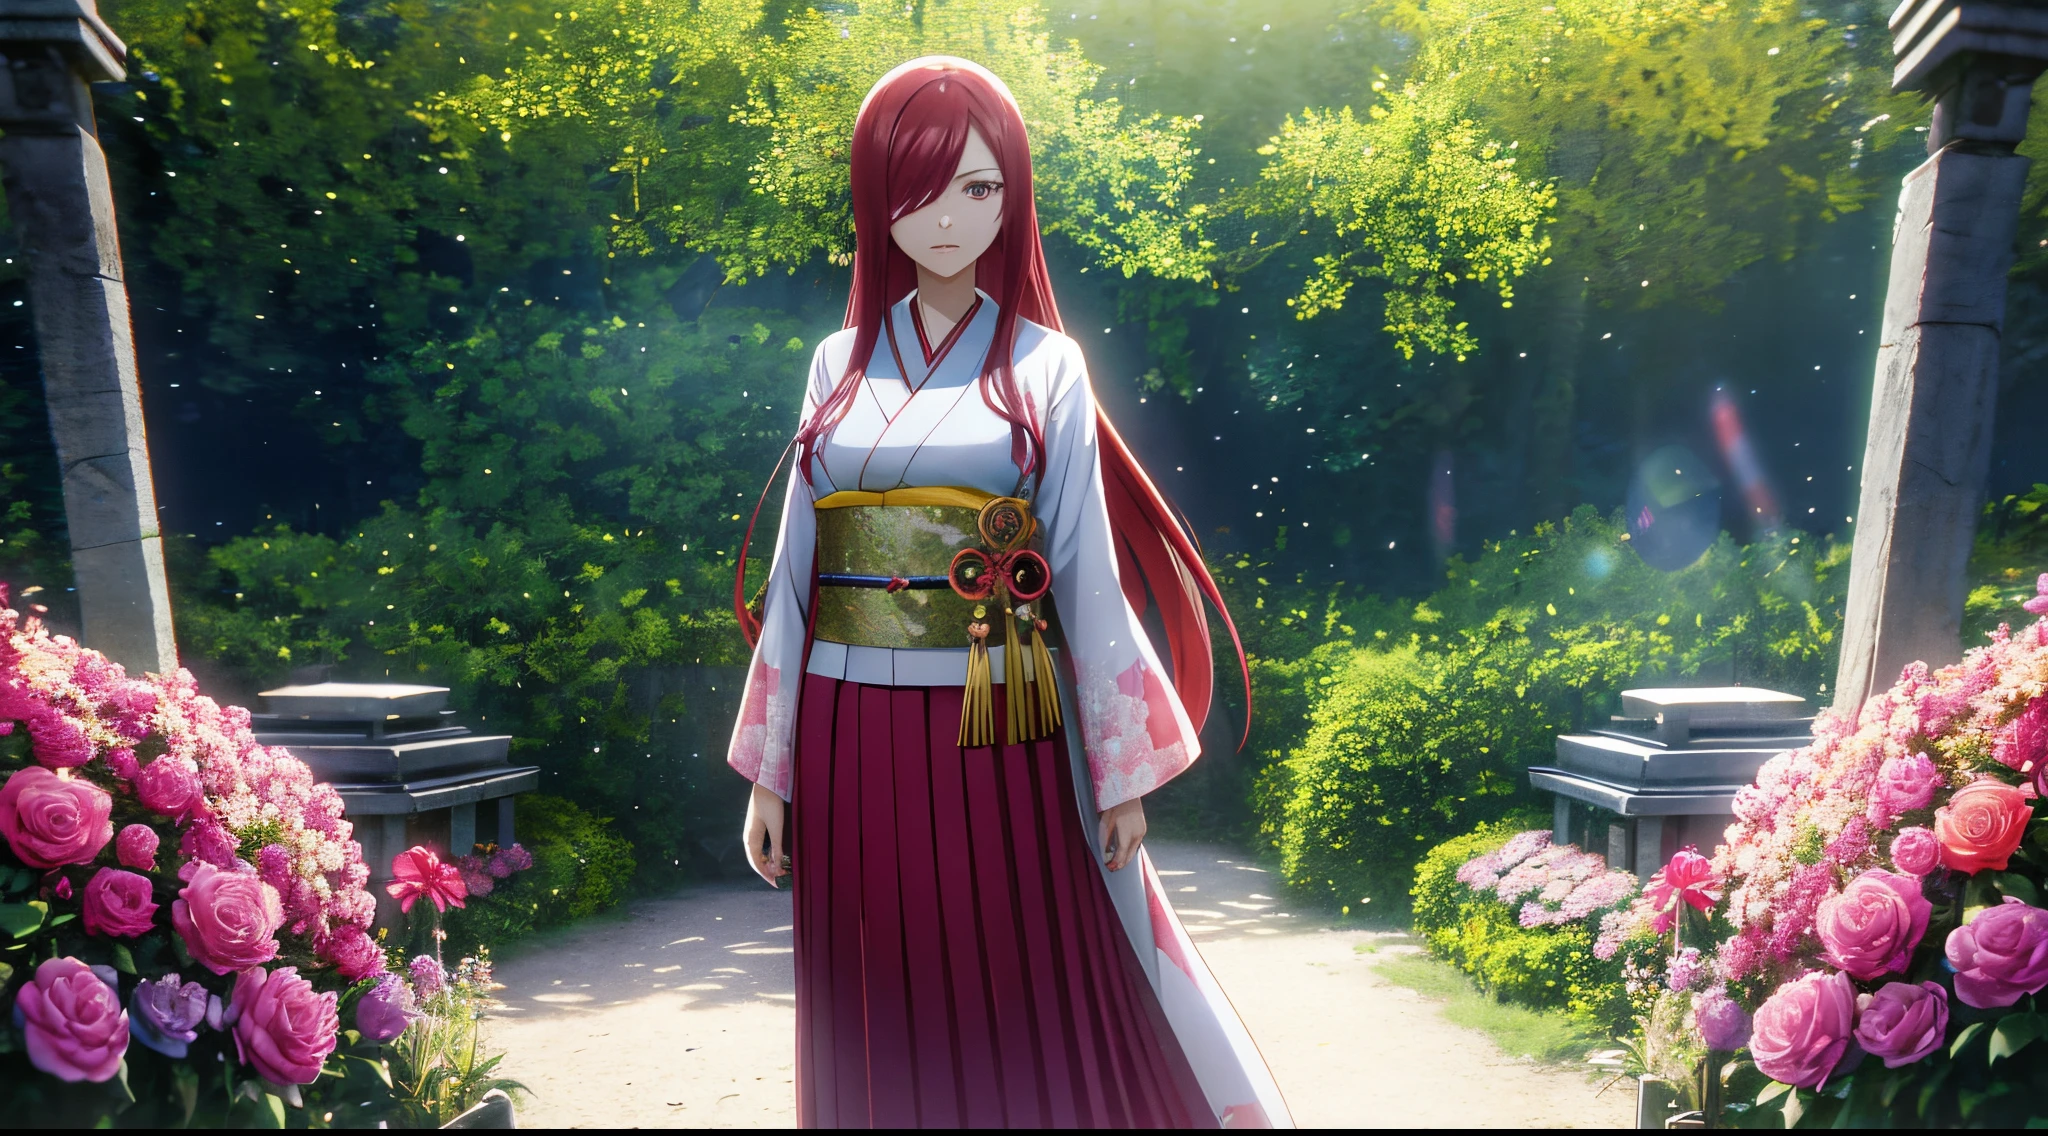 erza, 1girl, solo, long_hair, medium breasts,brown_eyes,red_hair,hair over one eye, standing, looking at viewer, flowers kimono, praying beads on neck, long skirt, flowers field athens temple, anime style,deep depth of field,wide angle view,Lumen Reflections,Screen Space Reflections,Diffraction Grading,Chromatic Aberration,GB Displacement,Scan Lines,Ray Traced,Anti-Aliasing,FXAA,TXAA,RTX,SSAO,Shaders,OpenGL-Shaders,GLSL-Shaders,Post Processing,Post-Production,cell Shading,Tone Mapping,CGI,VFX,SFX,insanely detailed and intricate, 4K